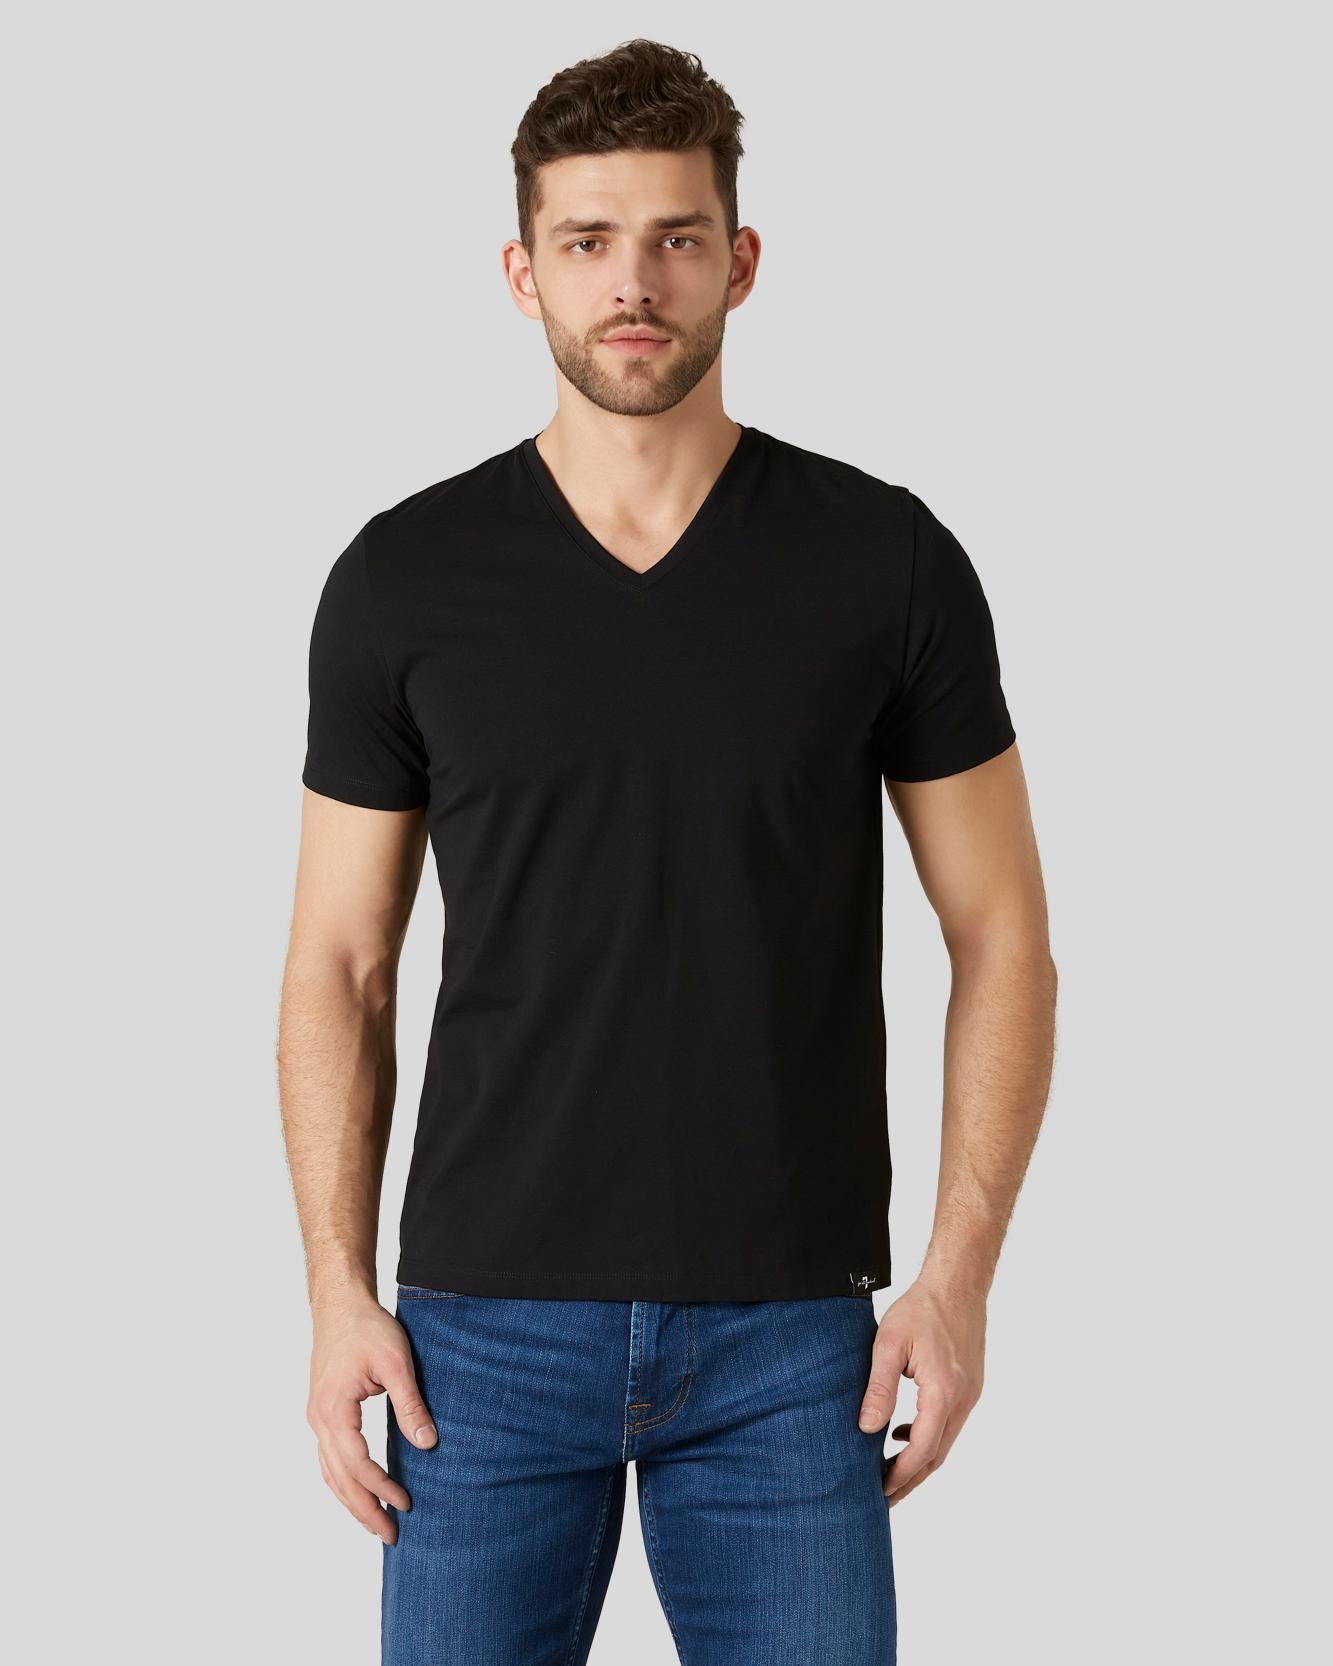 Luxe Performance V-Neck Tee in Black | 7 For All Mankind